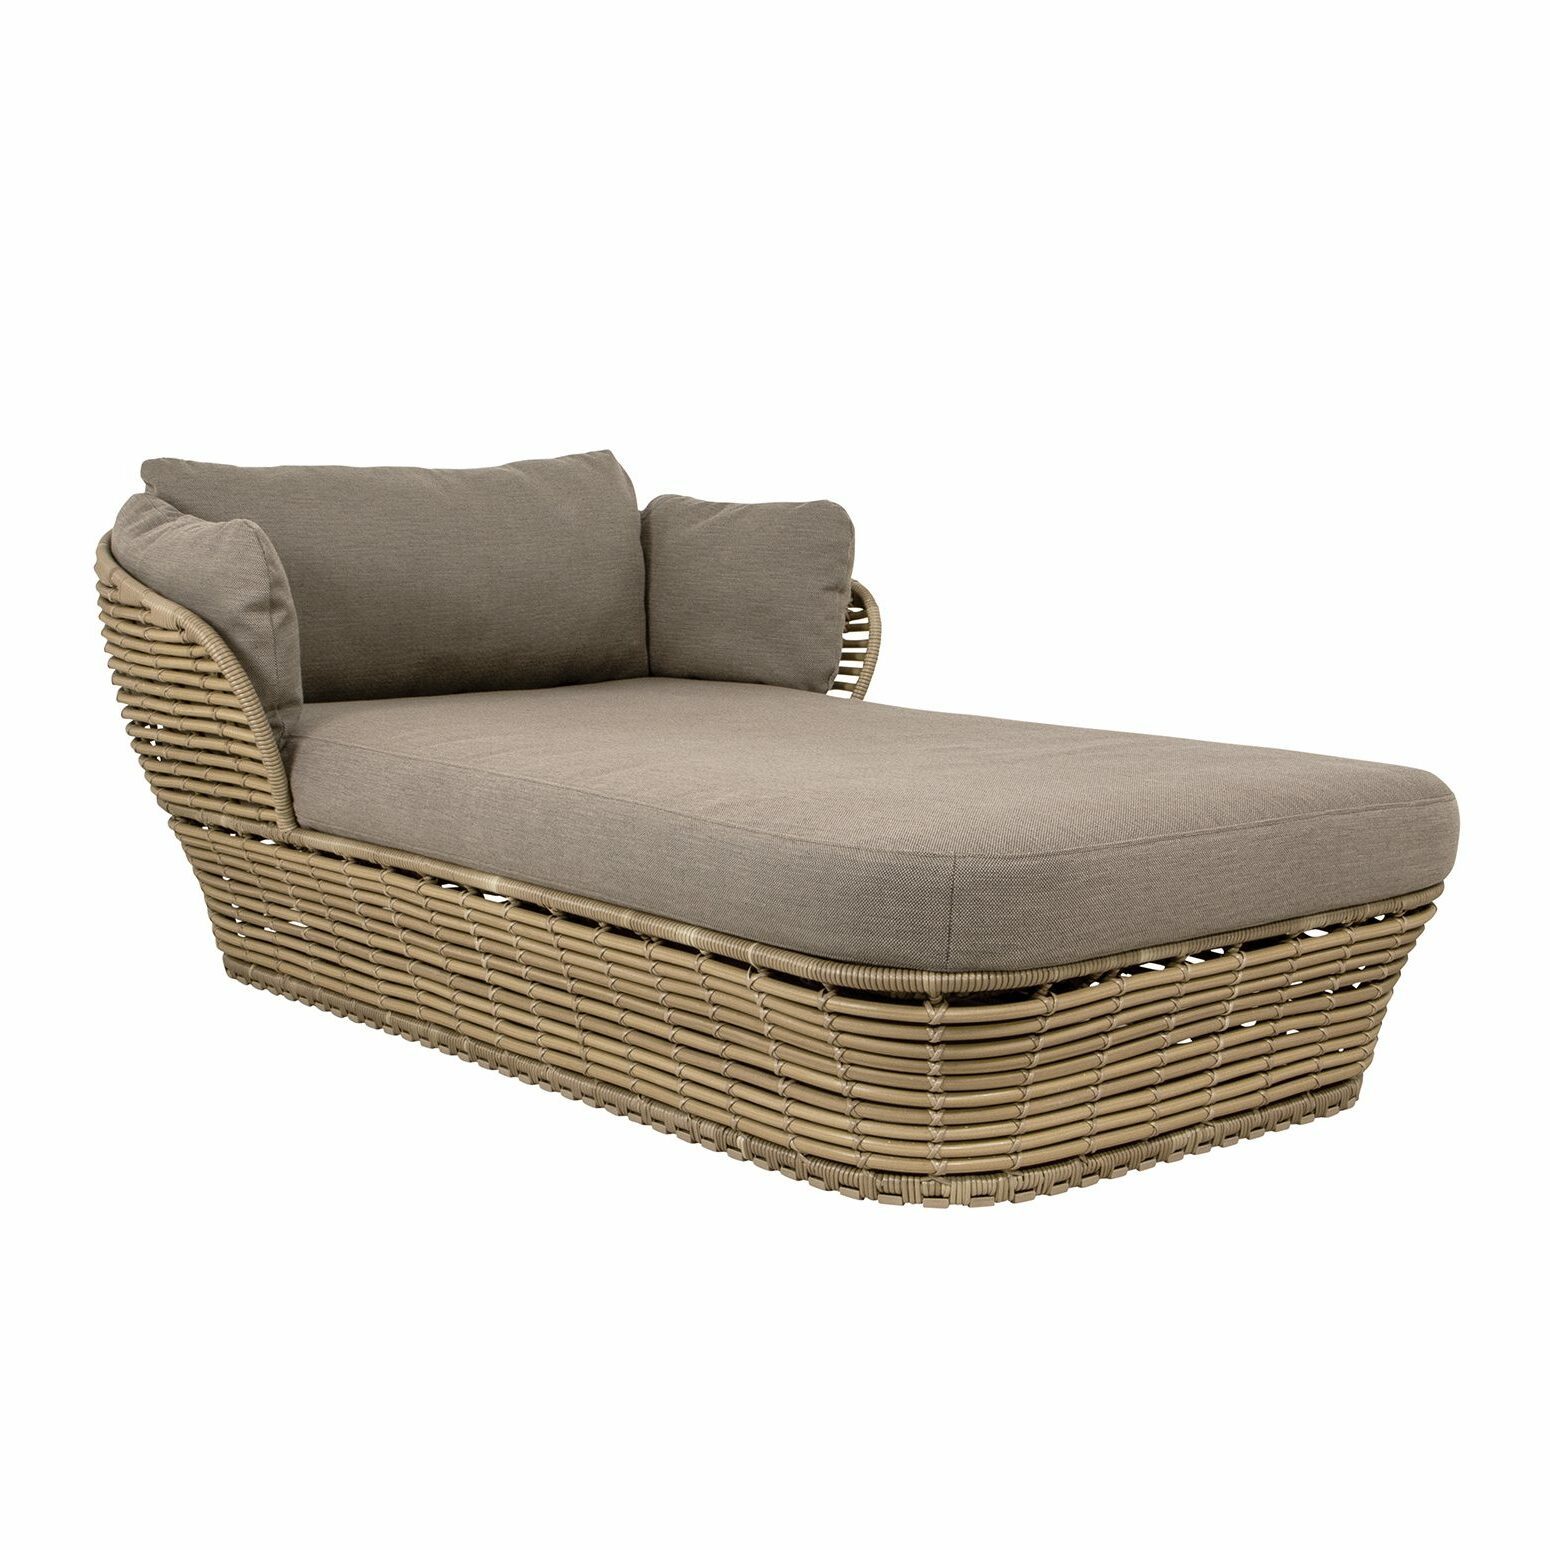 Cane-line "Basket" Daybed, Geflecht natural, AirTouch-Kissen taupe